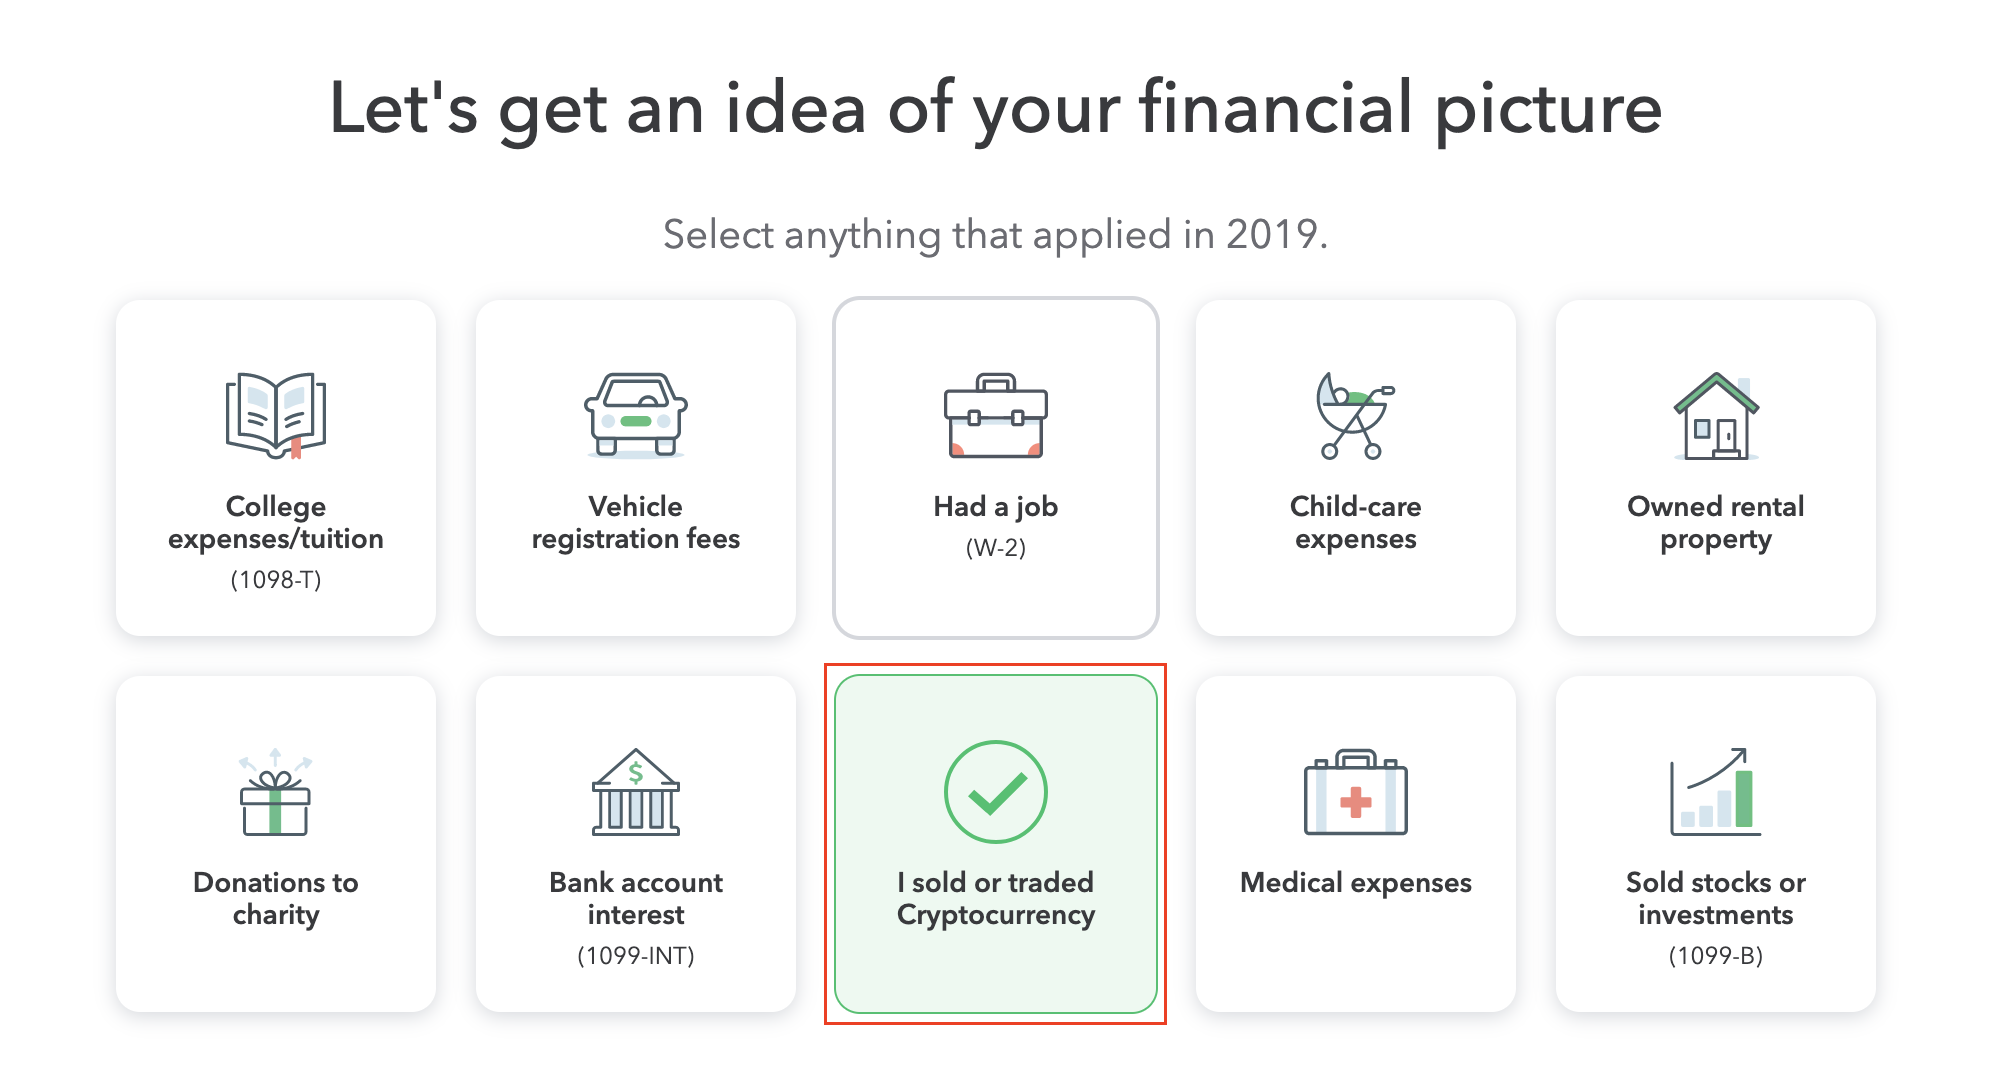 Selecting "I sold or traded cryptocurrency" on TurboTax